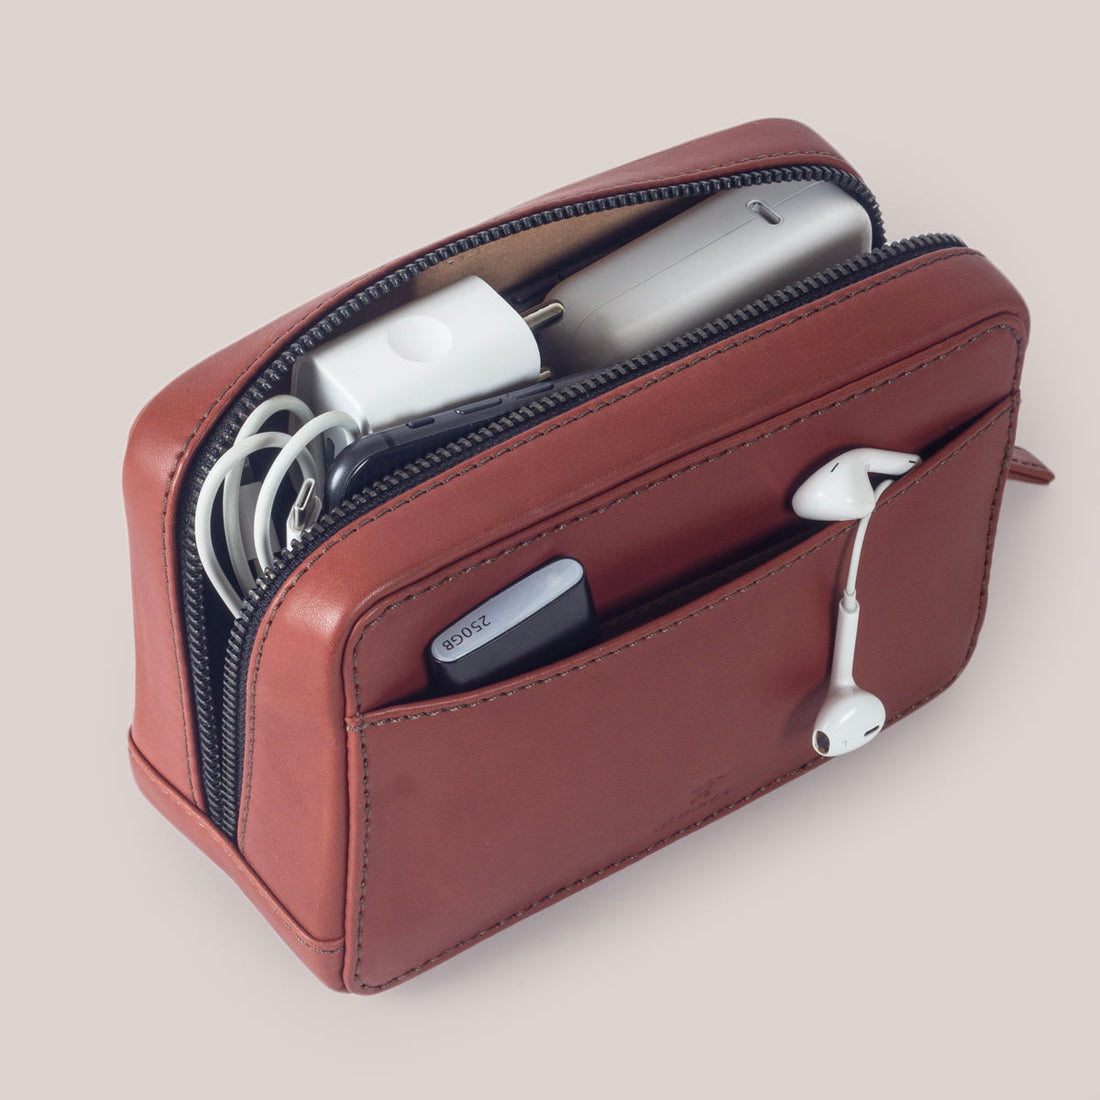 Buy Travel Leather Pouch Online at the Best Price